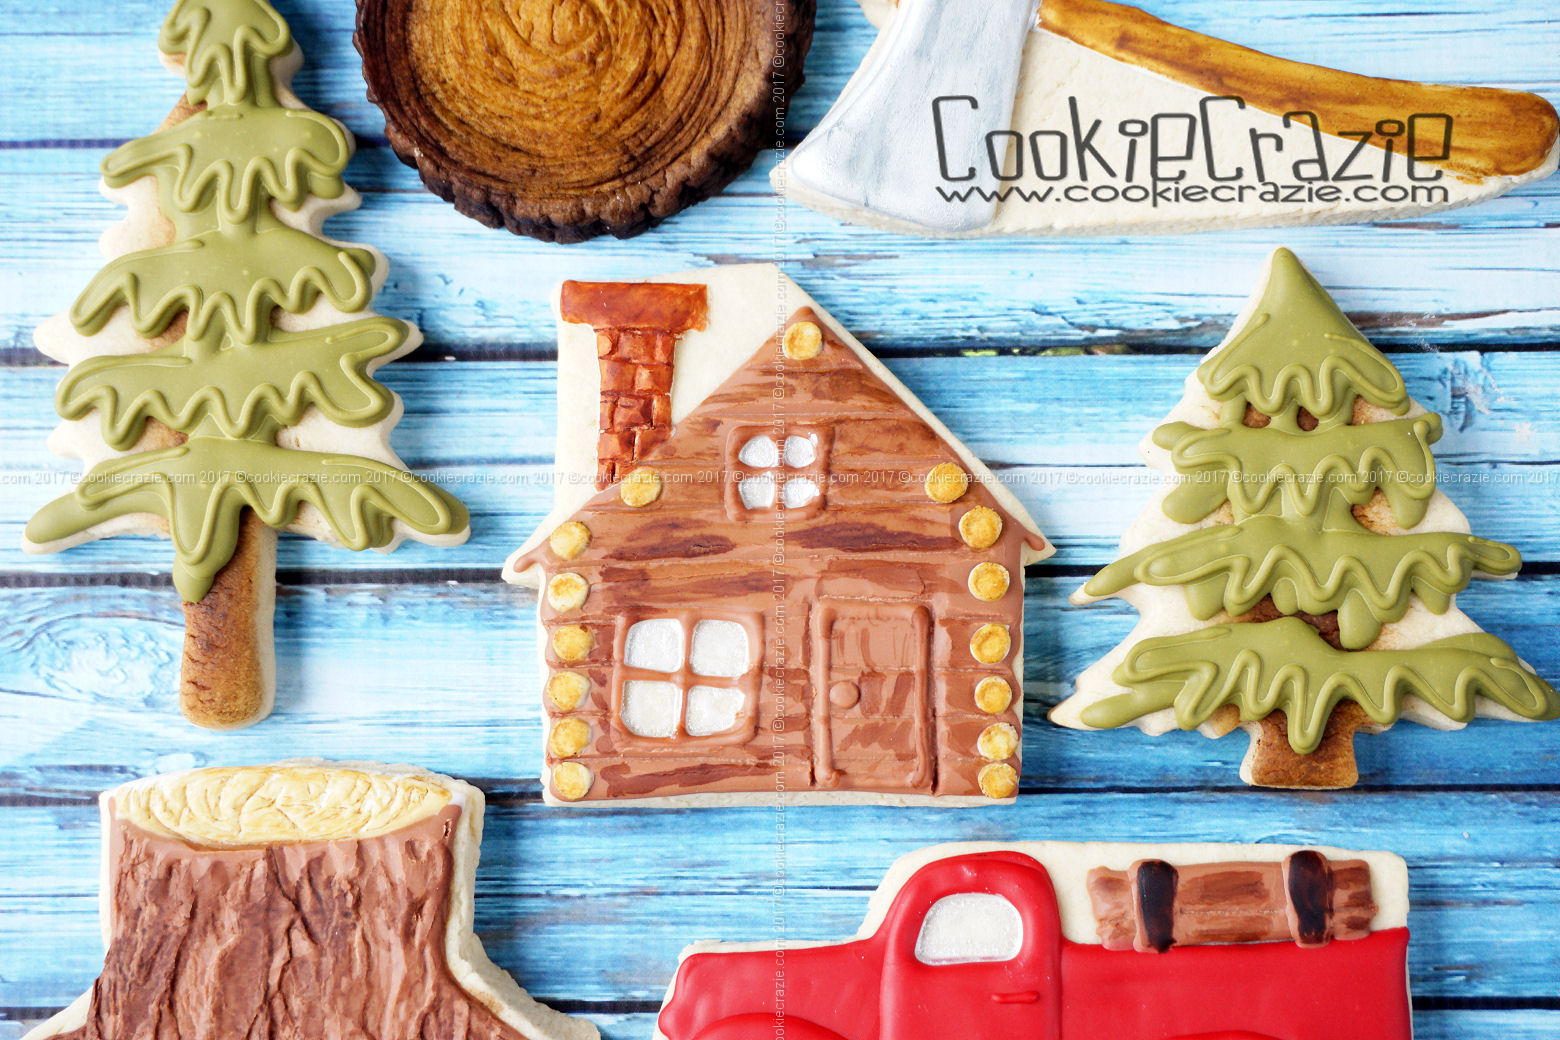  Log Cabin Decorated Cookie YouTube video found  HERE  